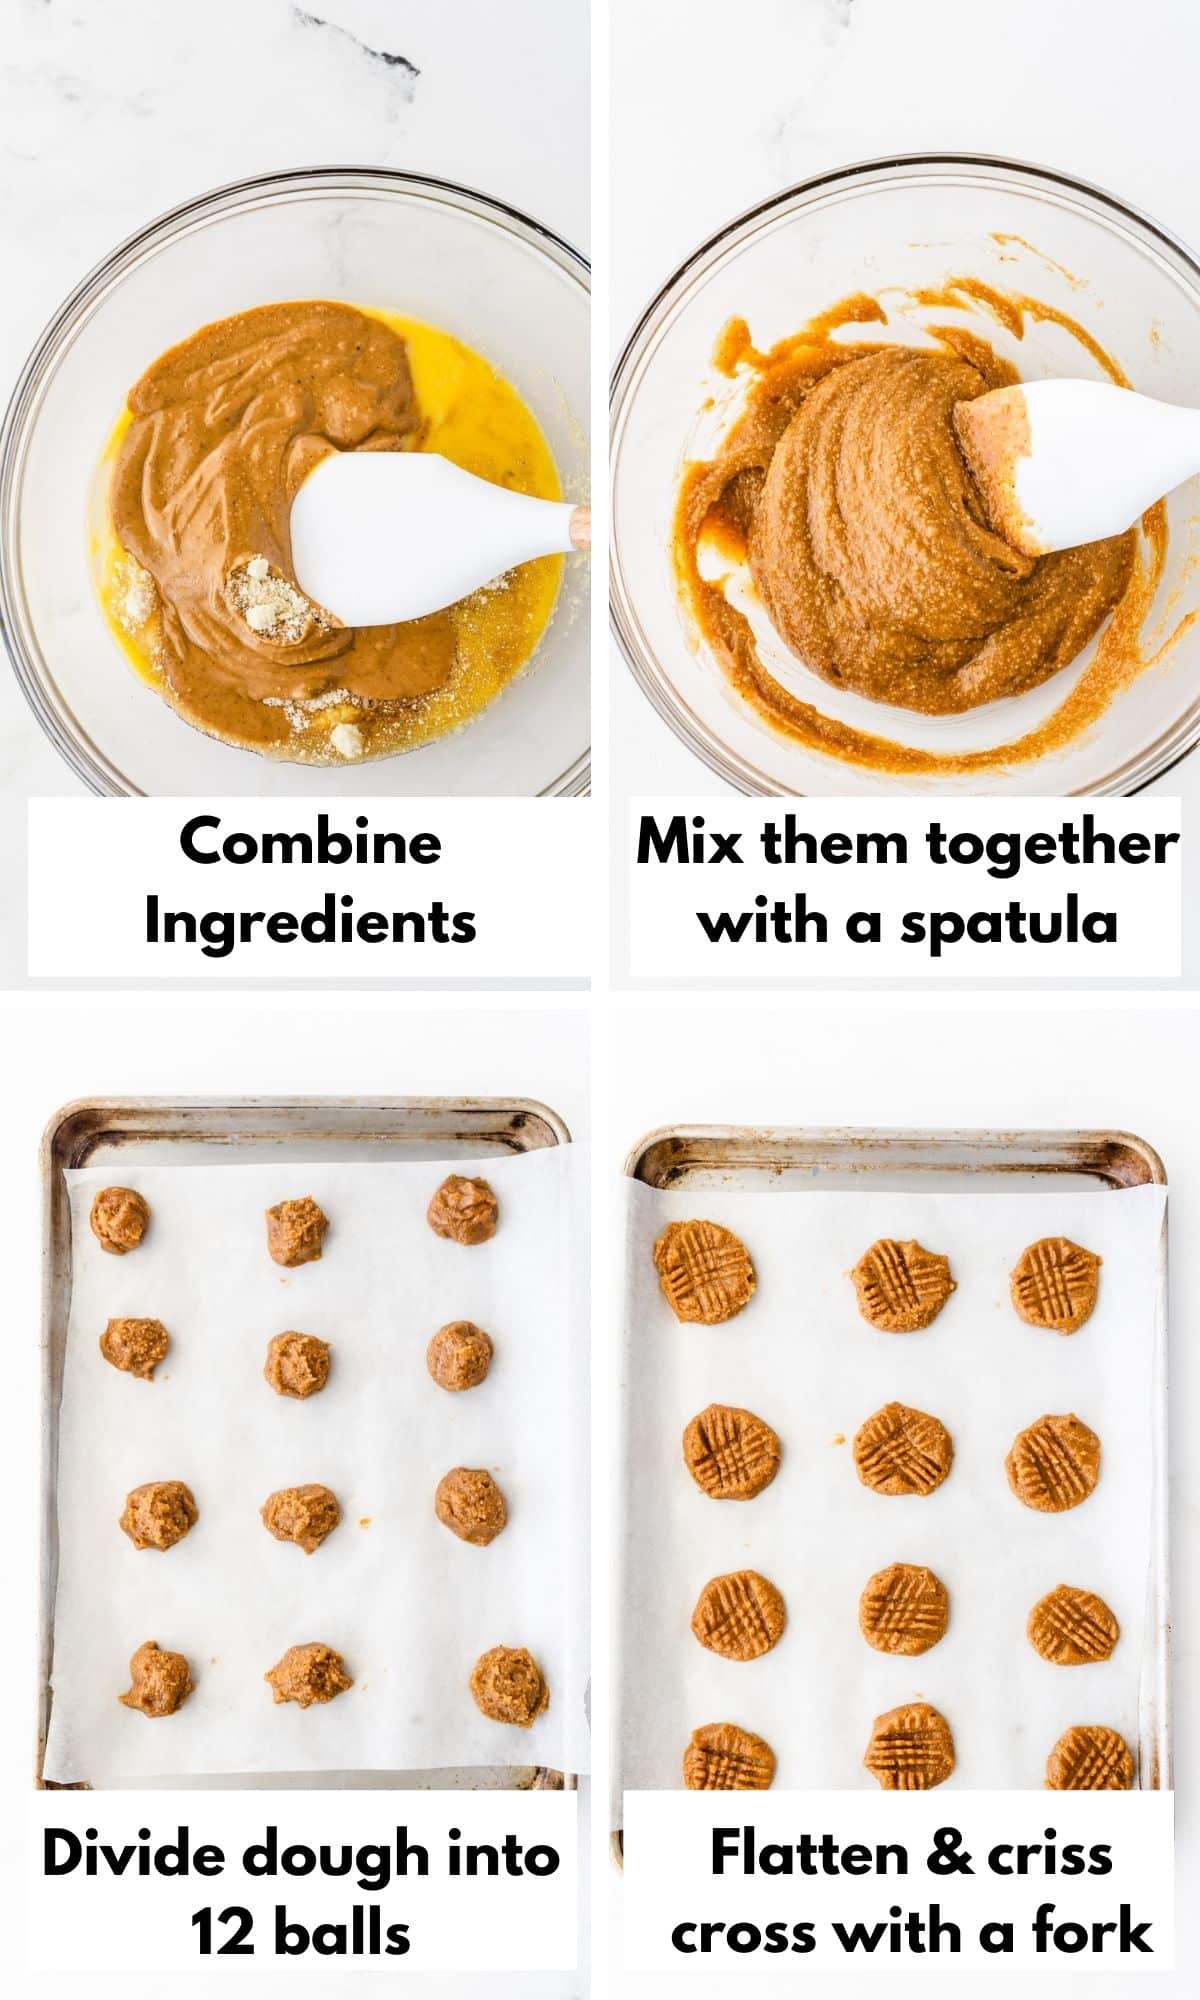 Pictures showing how to make peanut butter cookies